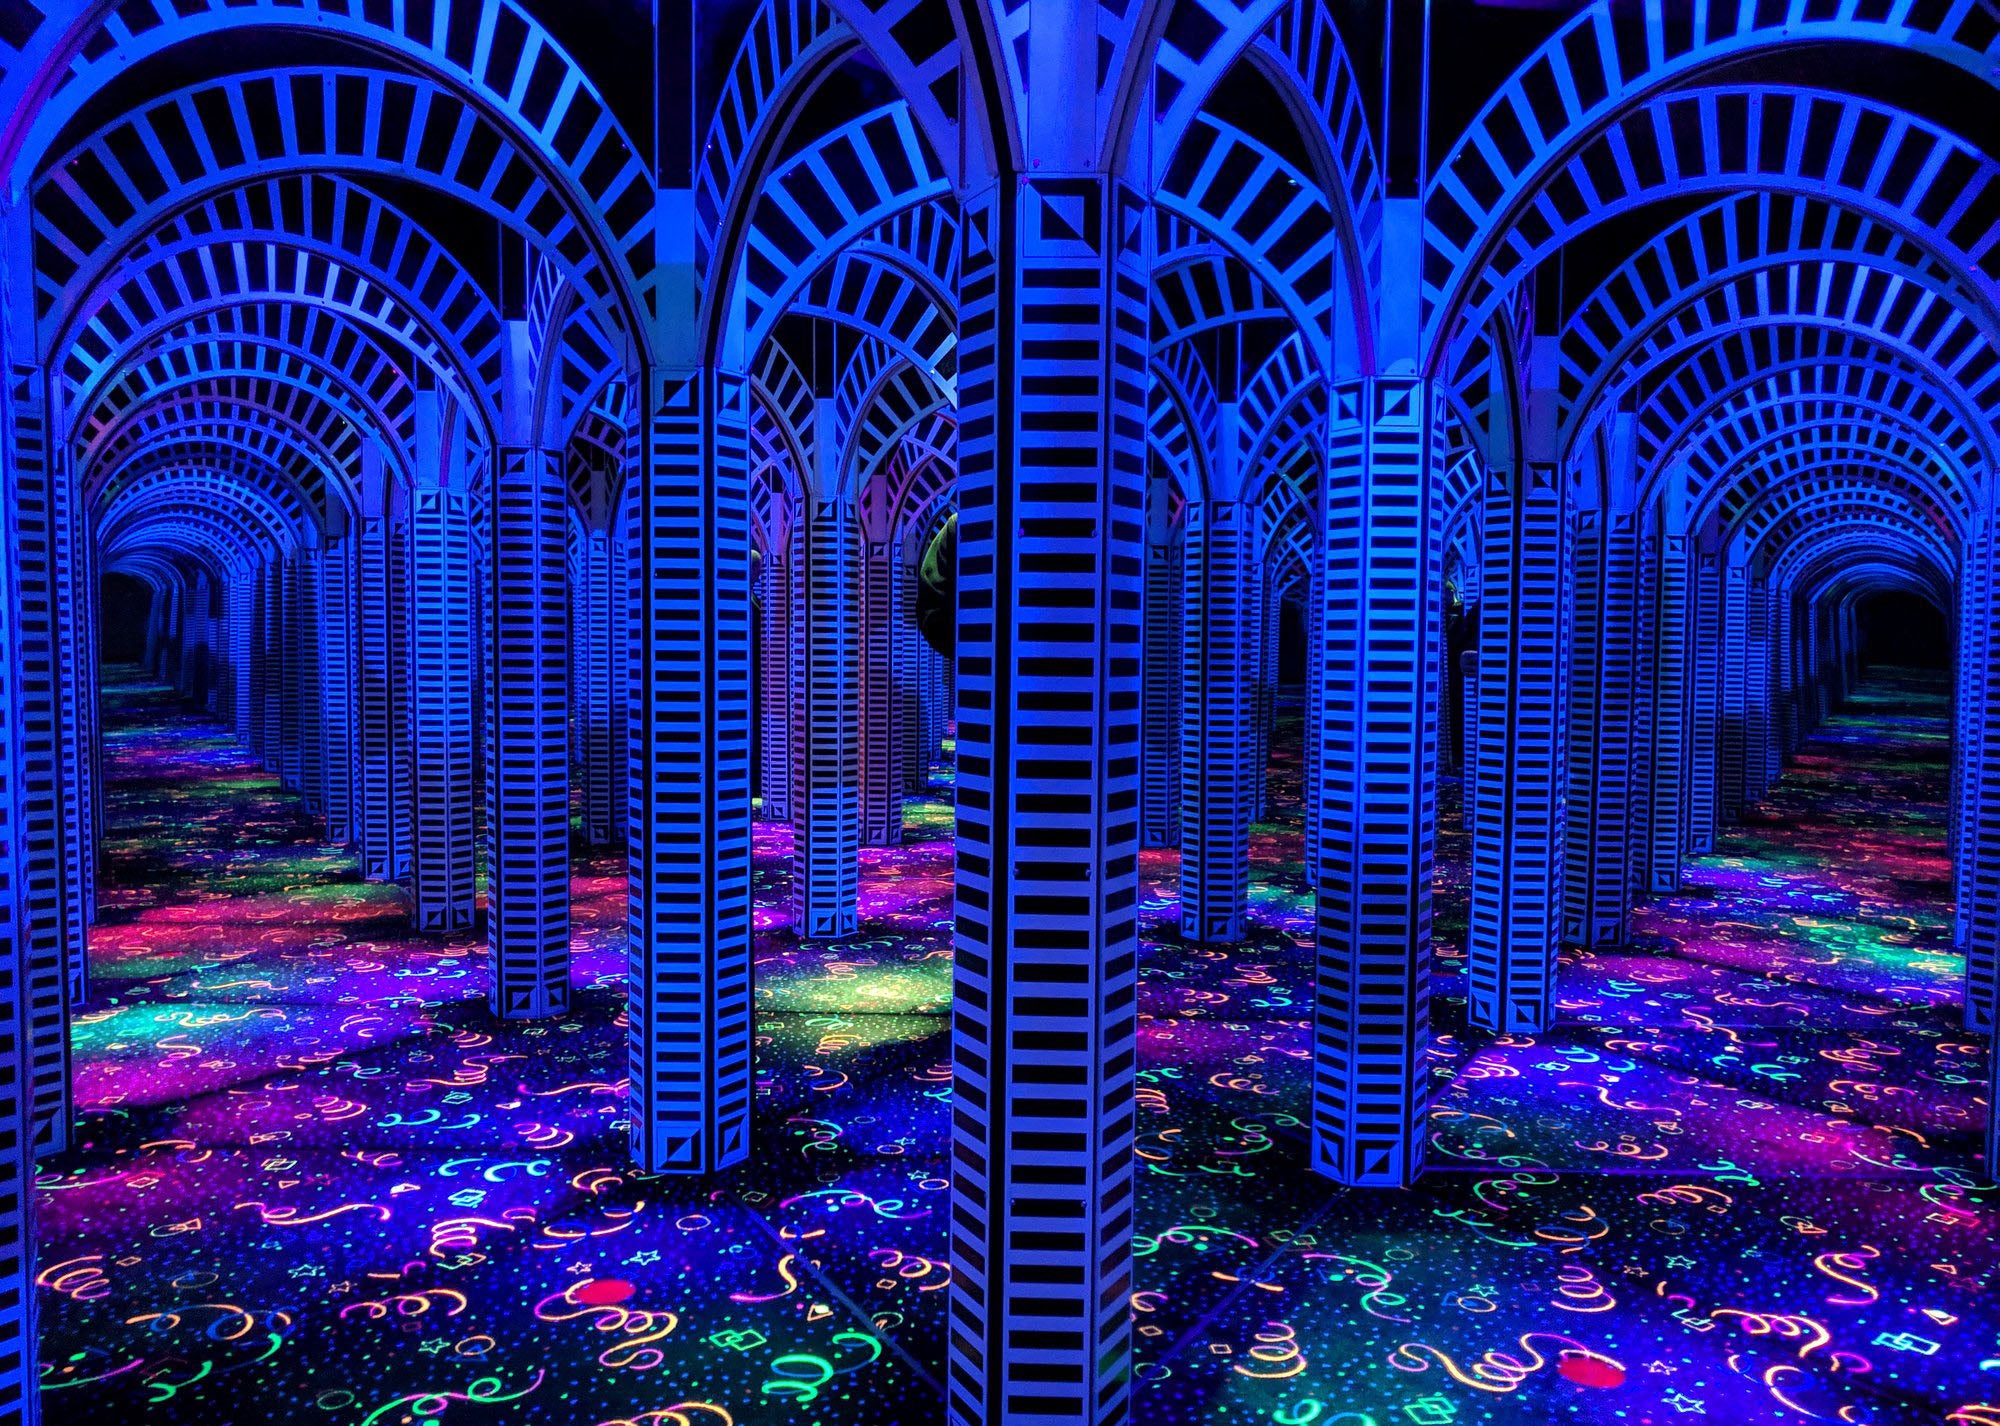 Mirror Maze Fun Facts and History